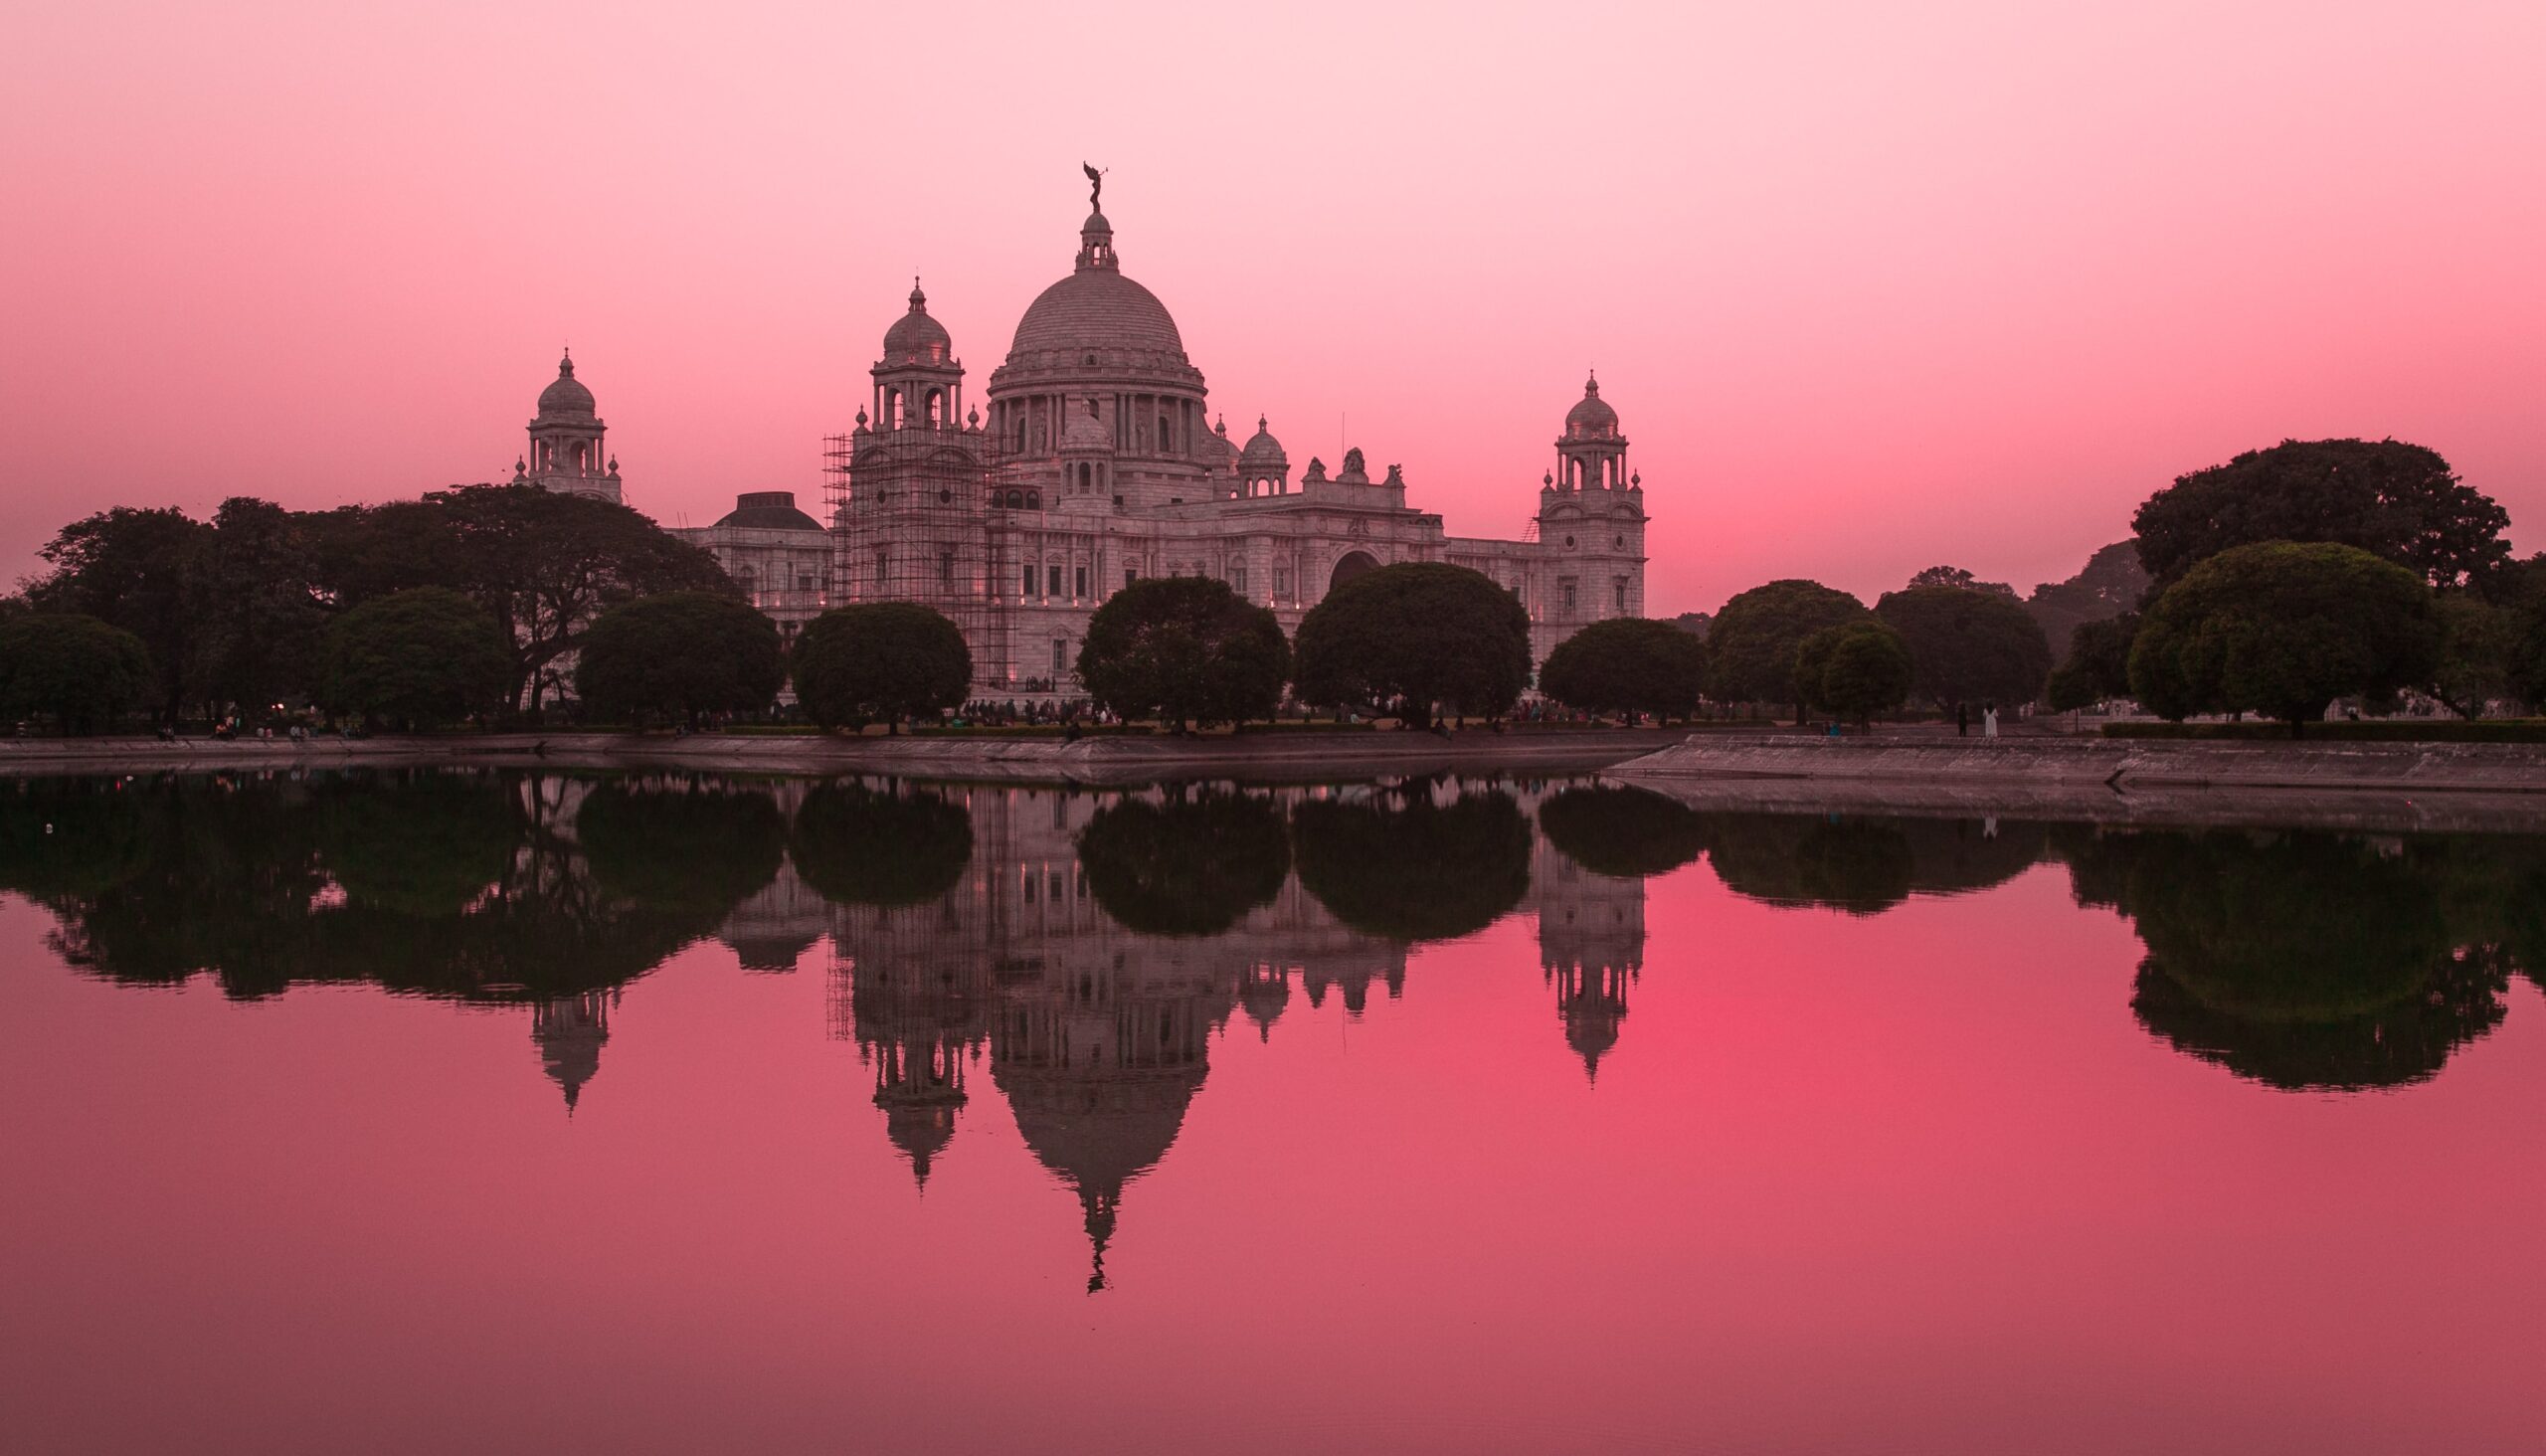 SMART TRAVEL HACKS: ESSENTIAL TIPS TO KNOW BEFORE YOUR TRIP TO INDIA